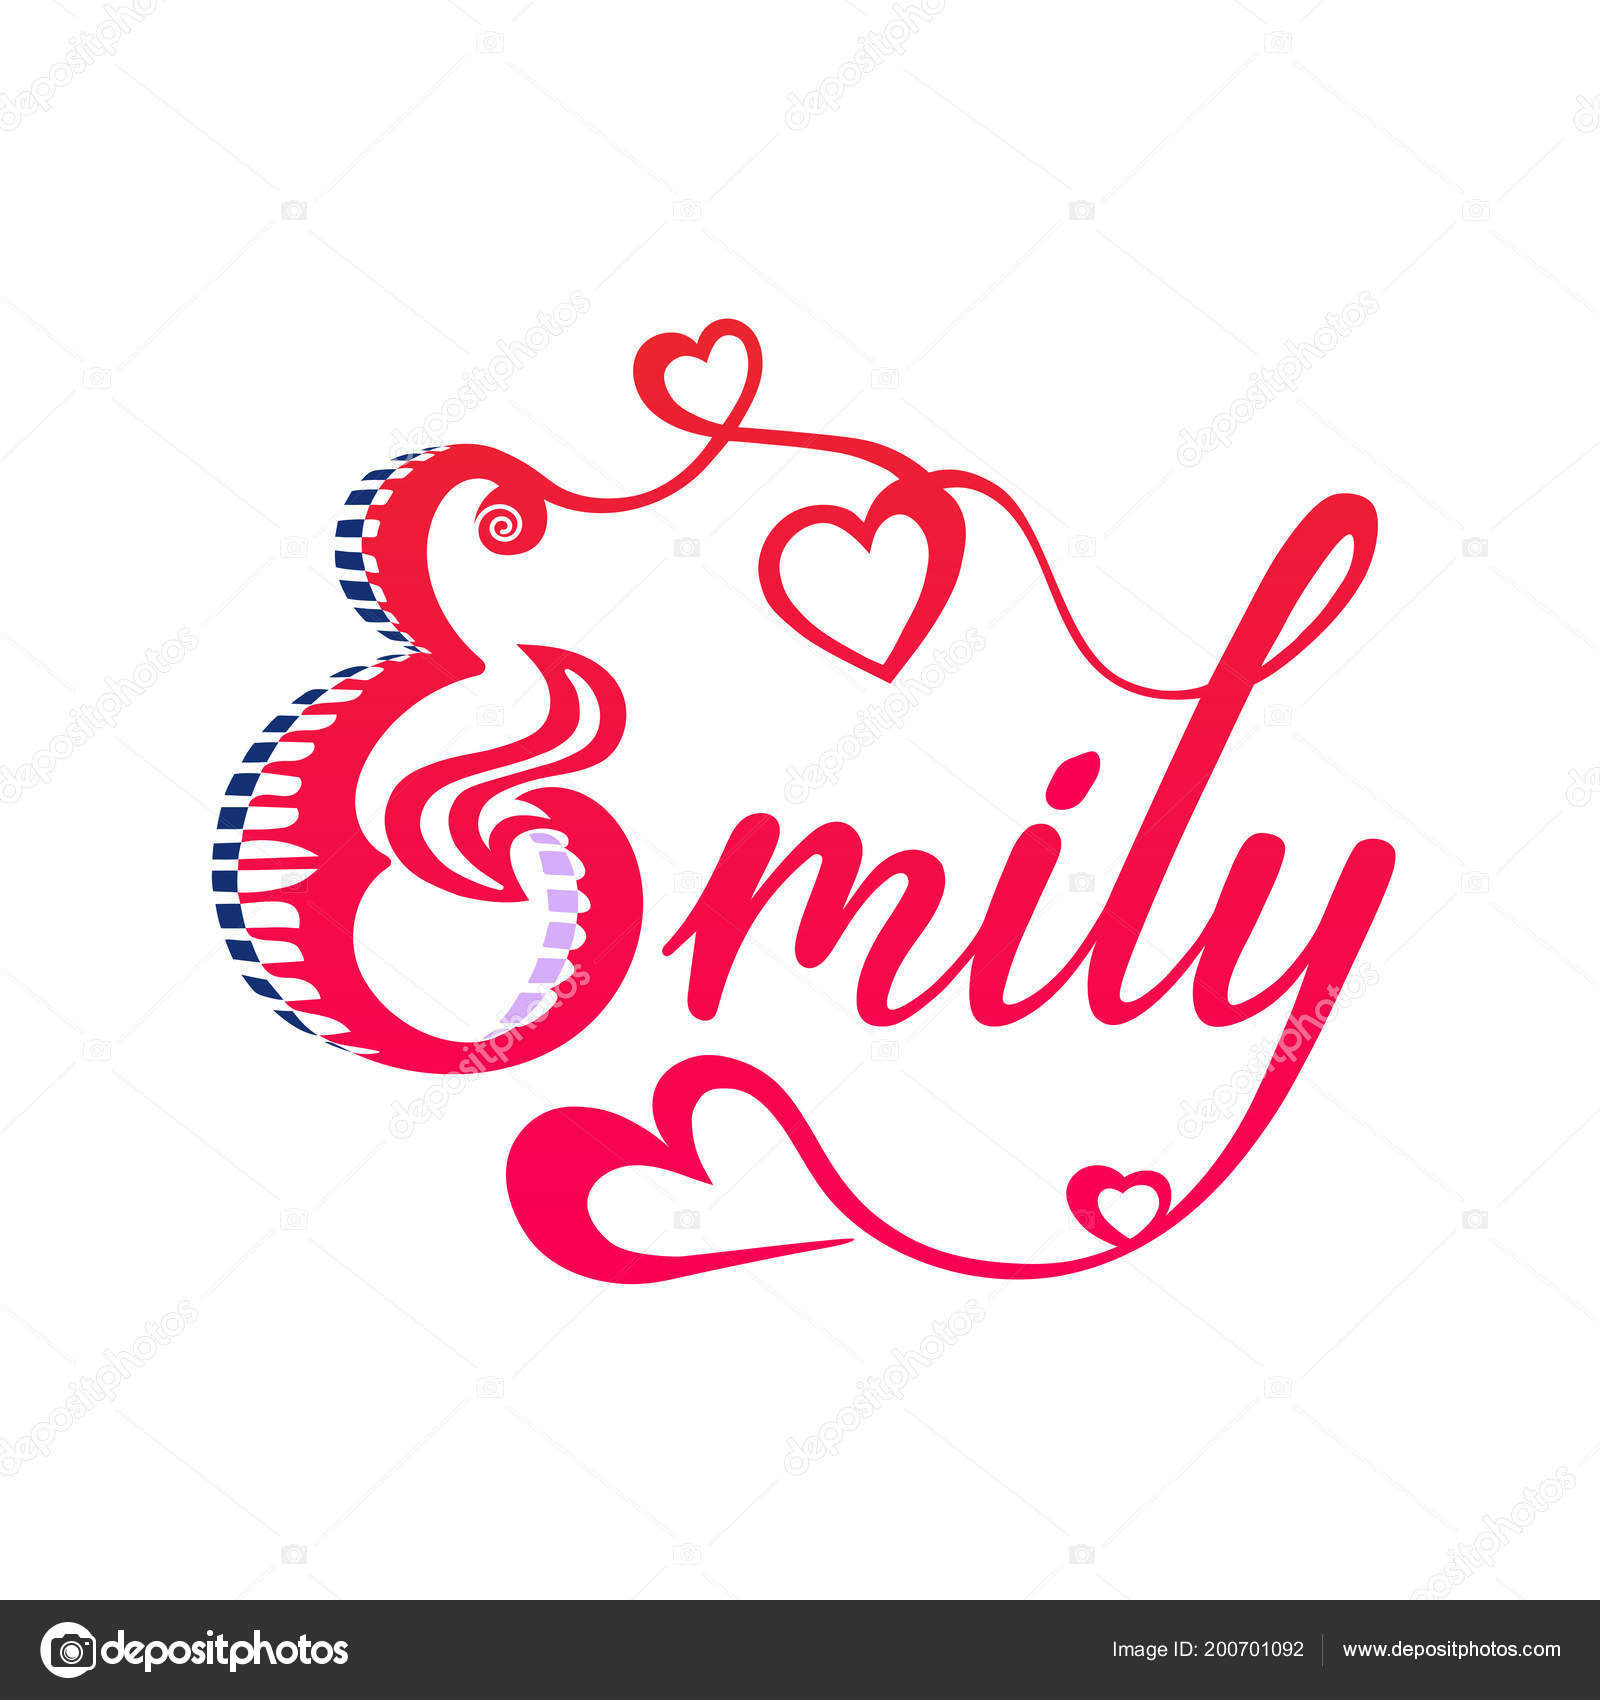 Collection 92+ Images pictures of the name emily Full HD, 2k, 4k